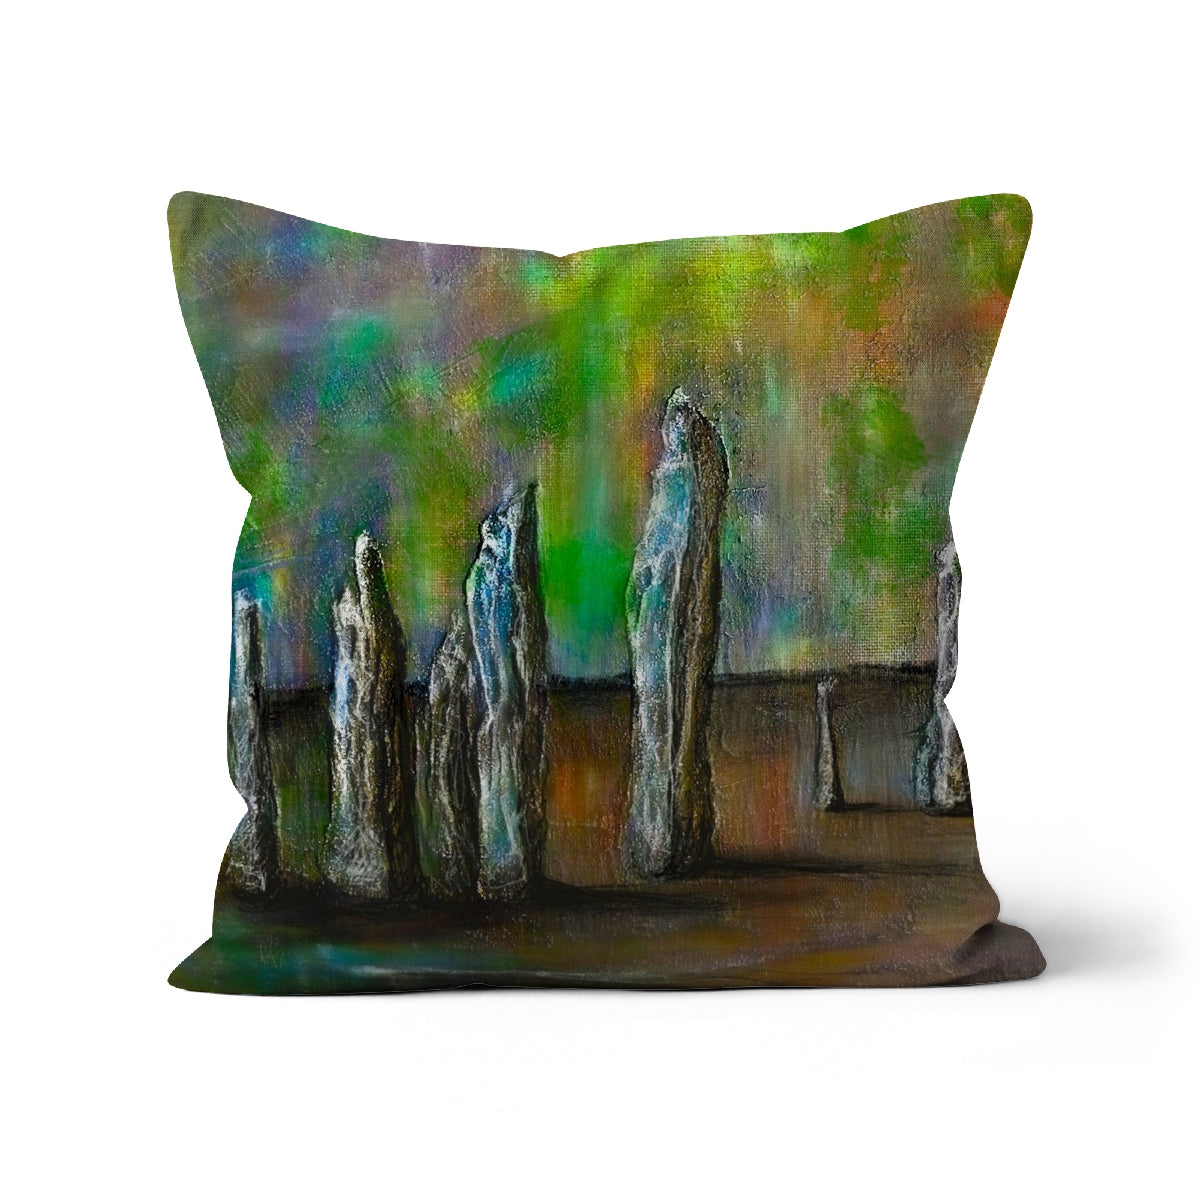 Callanish Northern Lights Art Gifts Cushion-Cushions-Hebridean Islands Art Gallery-Linen-22"x22"-Paintings, Prints, Homeware, Art Gifts From Scotland By Scottish Artist Kevin Hunter